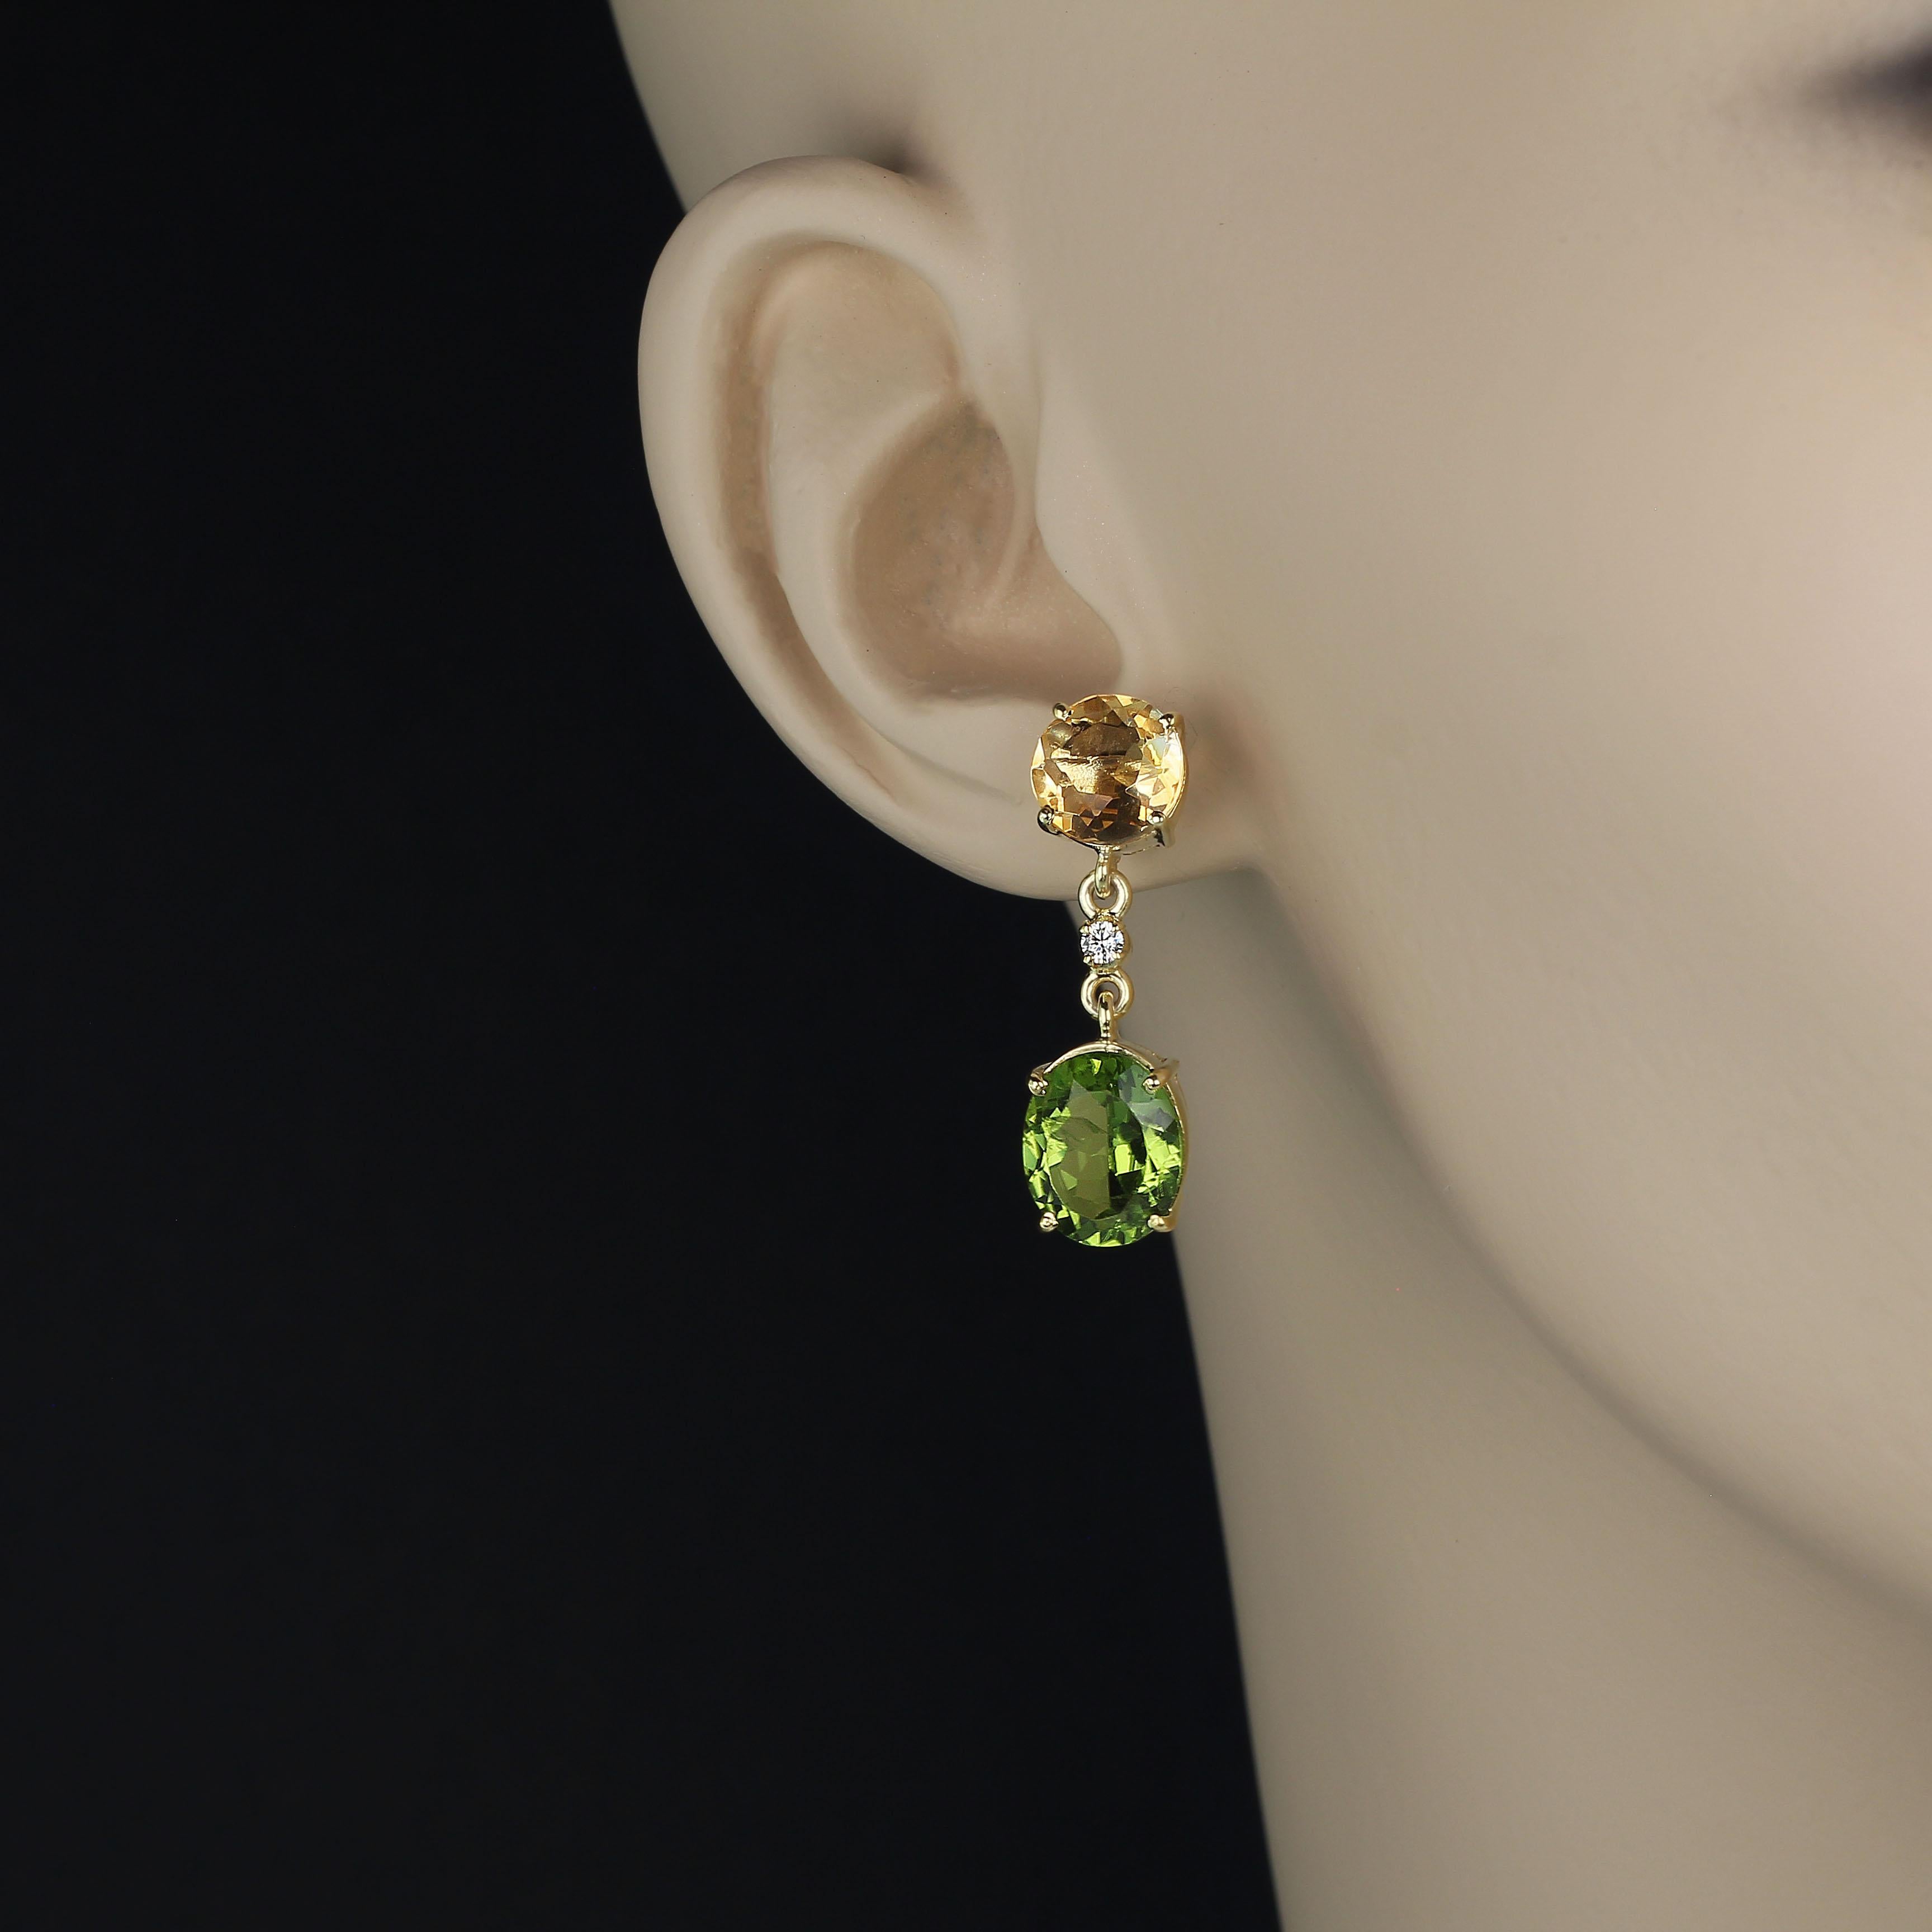 Golden Citrine and Brilliant Green Peridot Dangle Earrings. These gorgeous earrings feature 8MM round golden Citrines weighing total 4.5ct and green oval Peridot total 8.25ct. These earrings have a drop of 1 1/8 inches. 
In ancient times people